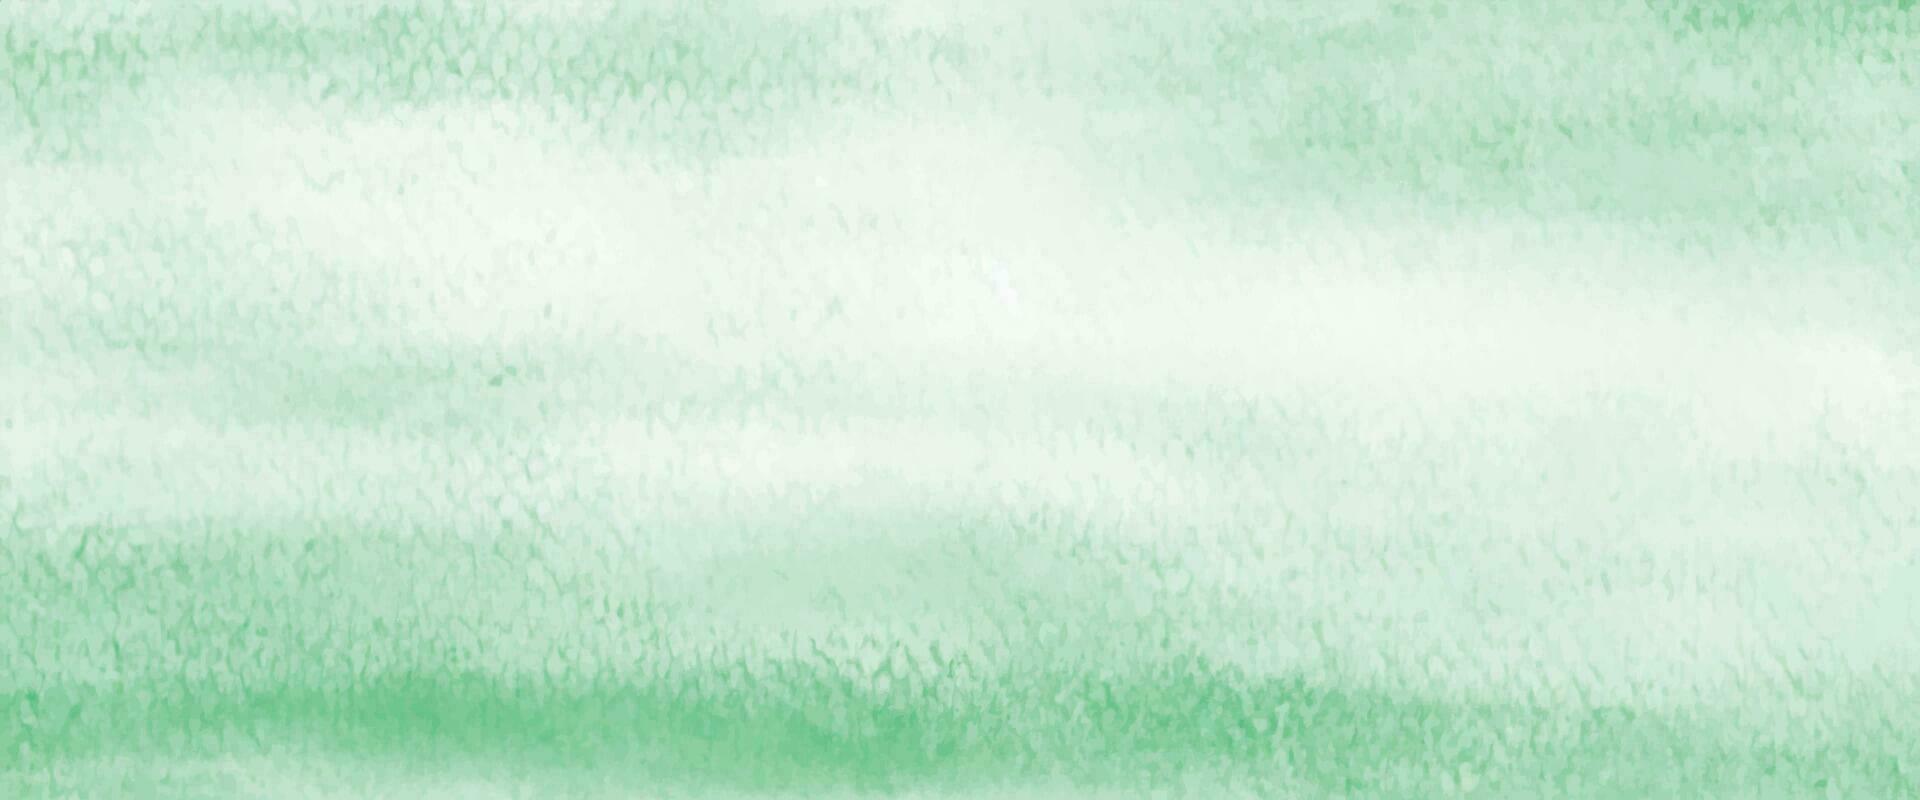 Green watercolor background, Watercolour painting soft textured vector